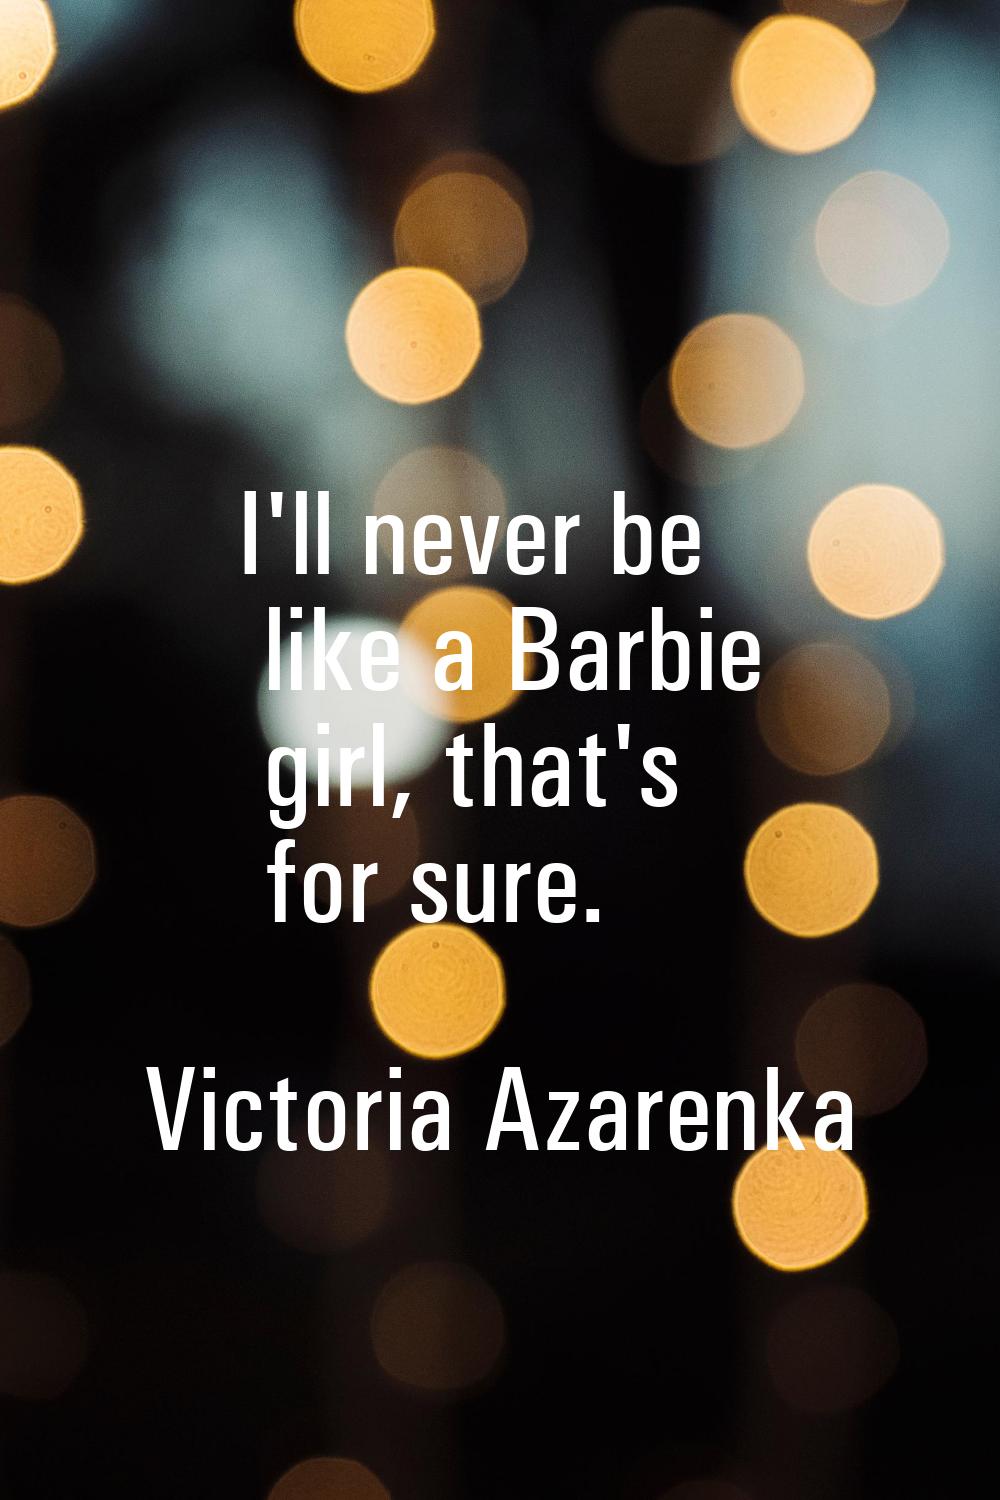 I'll never be like a Barbie girl, that's for sure.